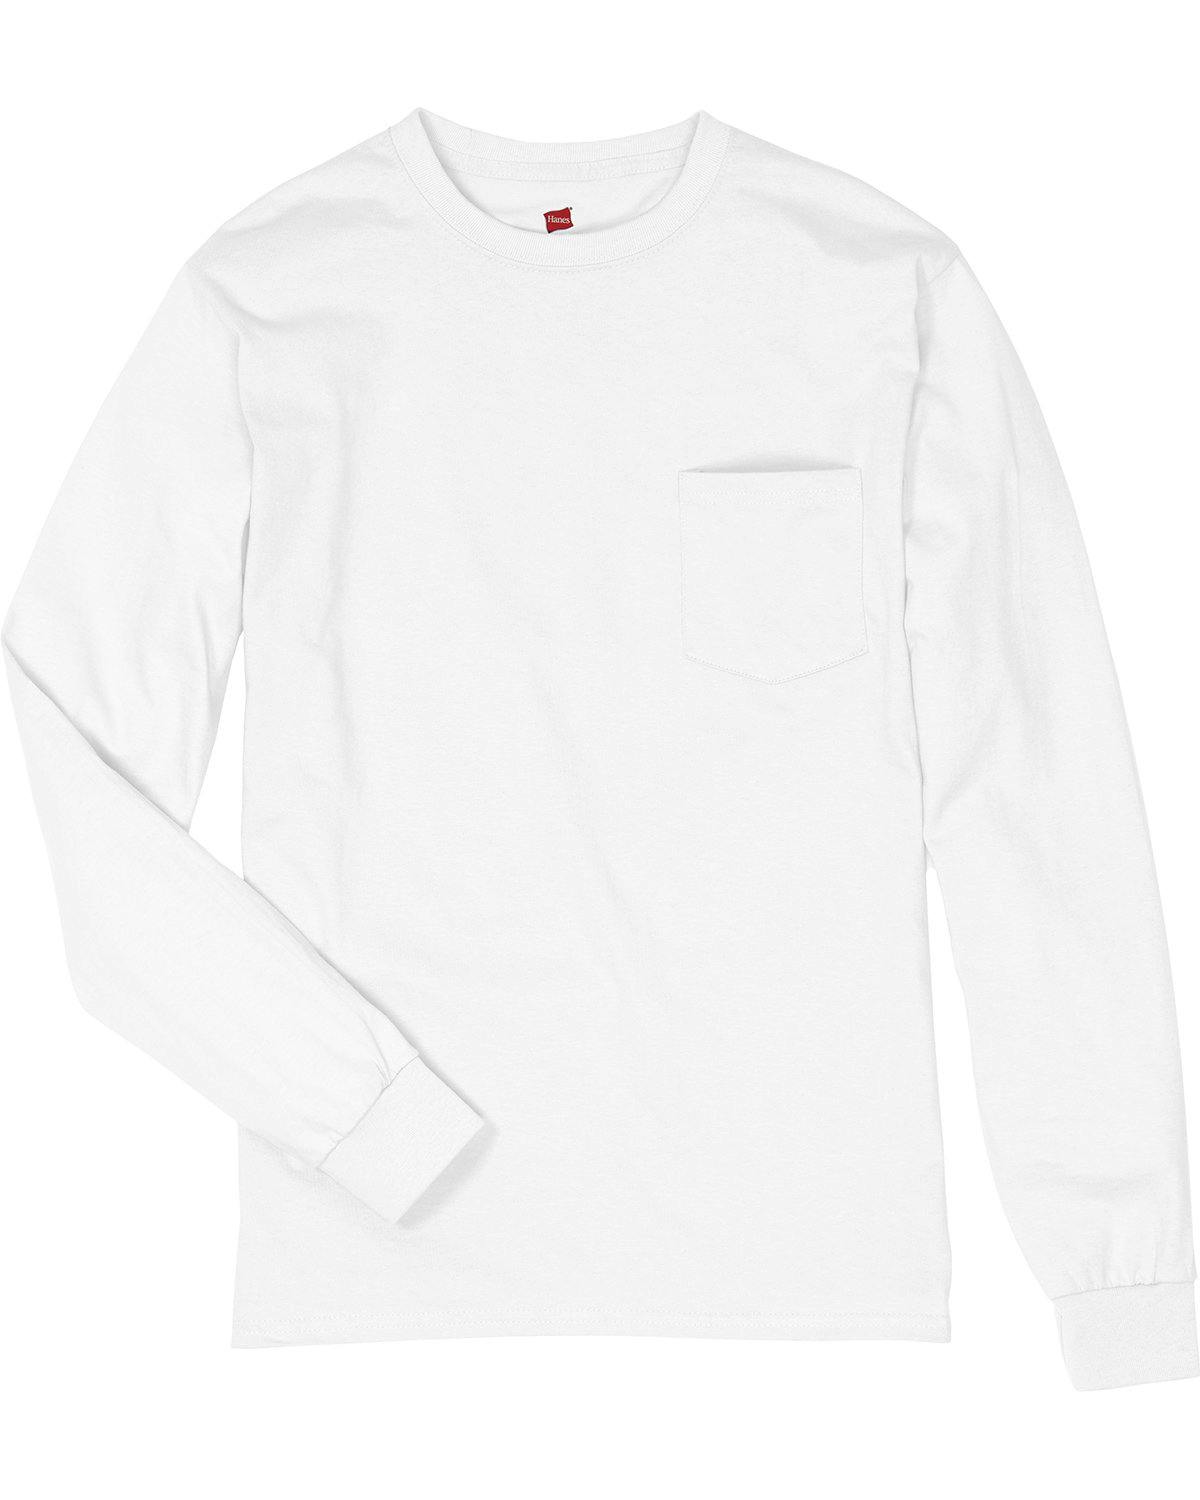 Image for Men's Authentic-T Long-Sleeve Pocket T-Shirt